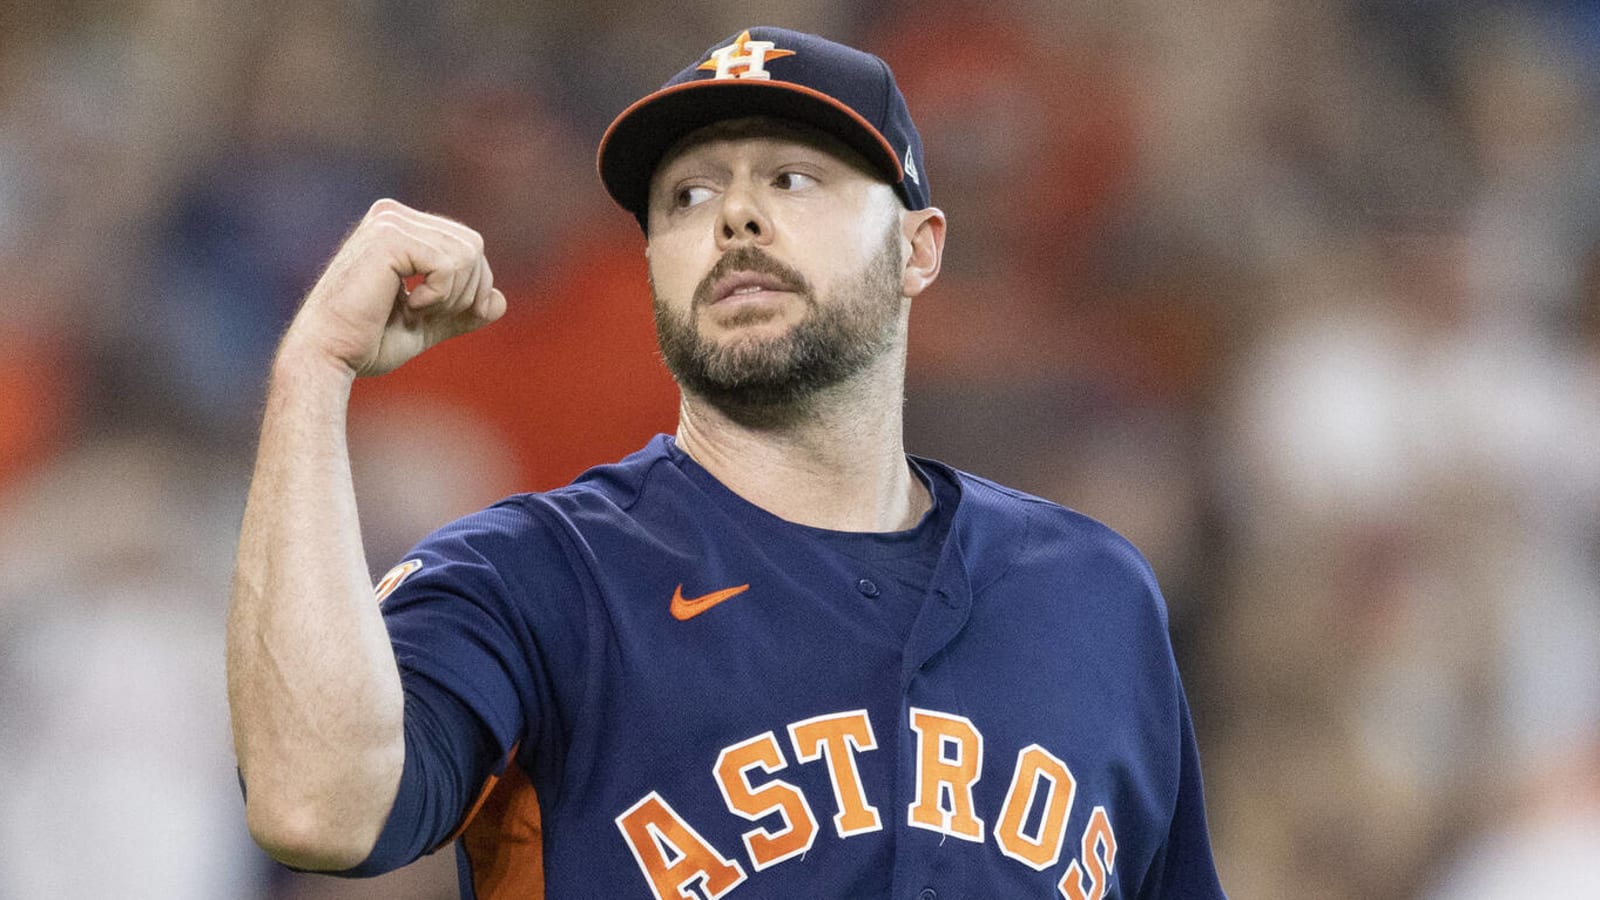 Ryan Pressly, Astros closer coming to close out the game and win